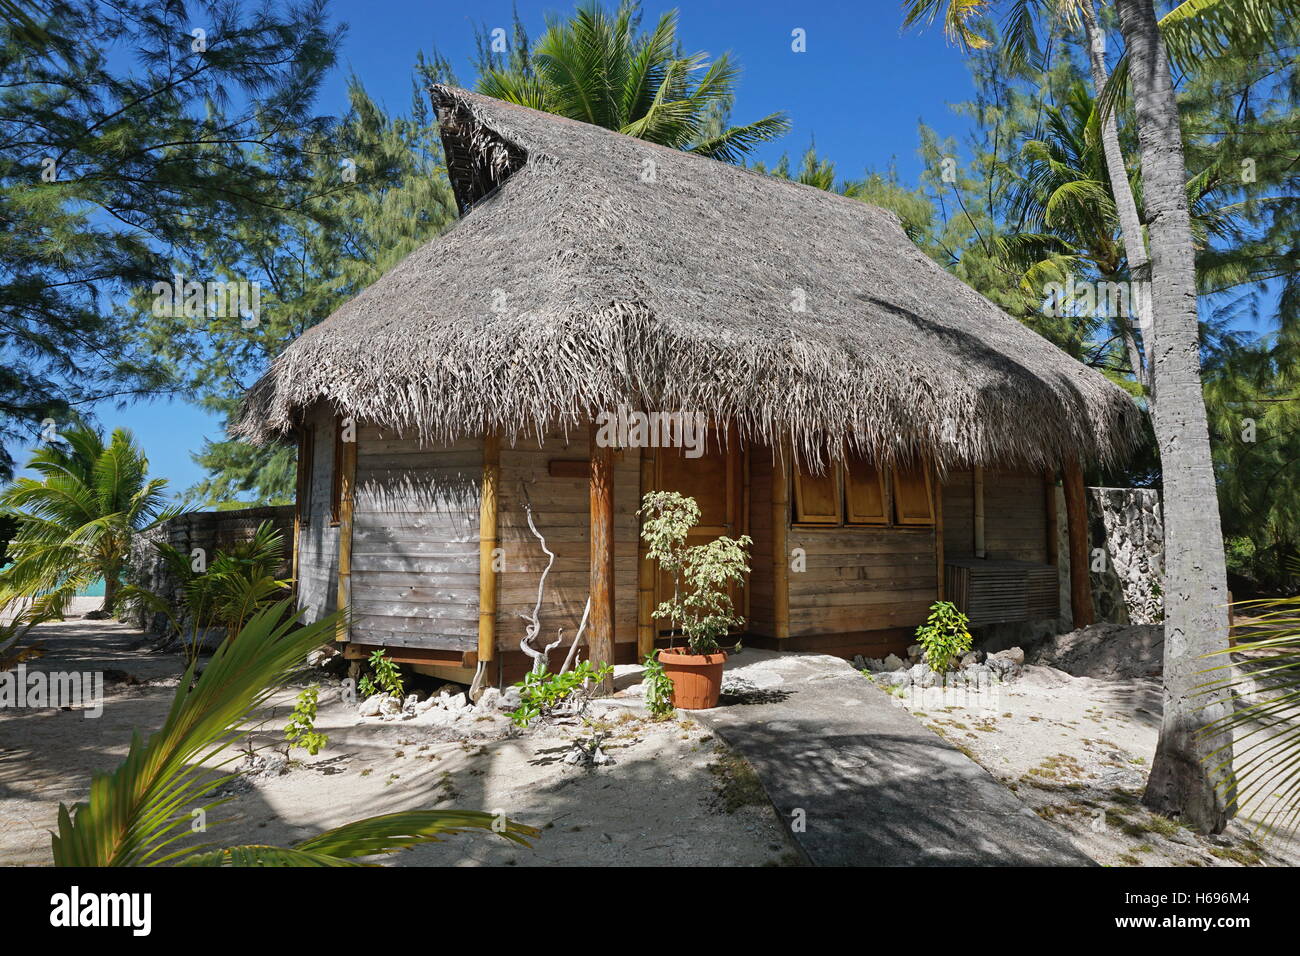 Wooden tropical bungalow with thatched roof on a motu of the atoll of Tikehau, Tuamotu, French Polynesia, south Pacific Stock Photo